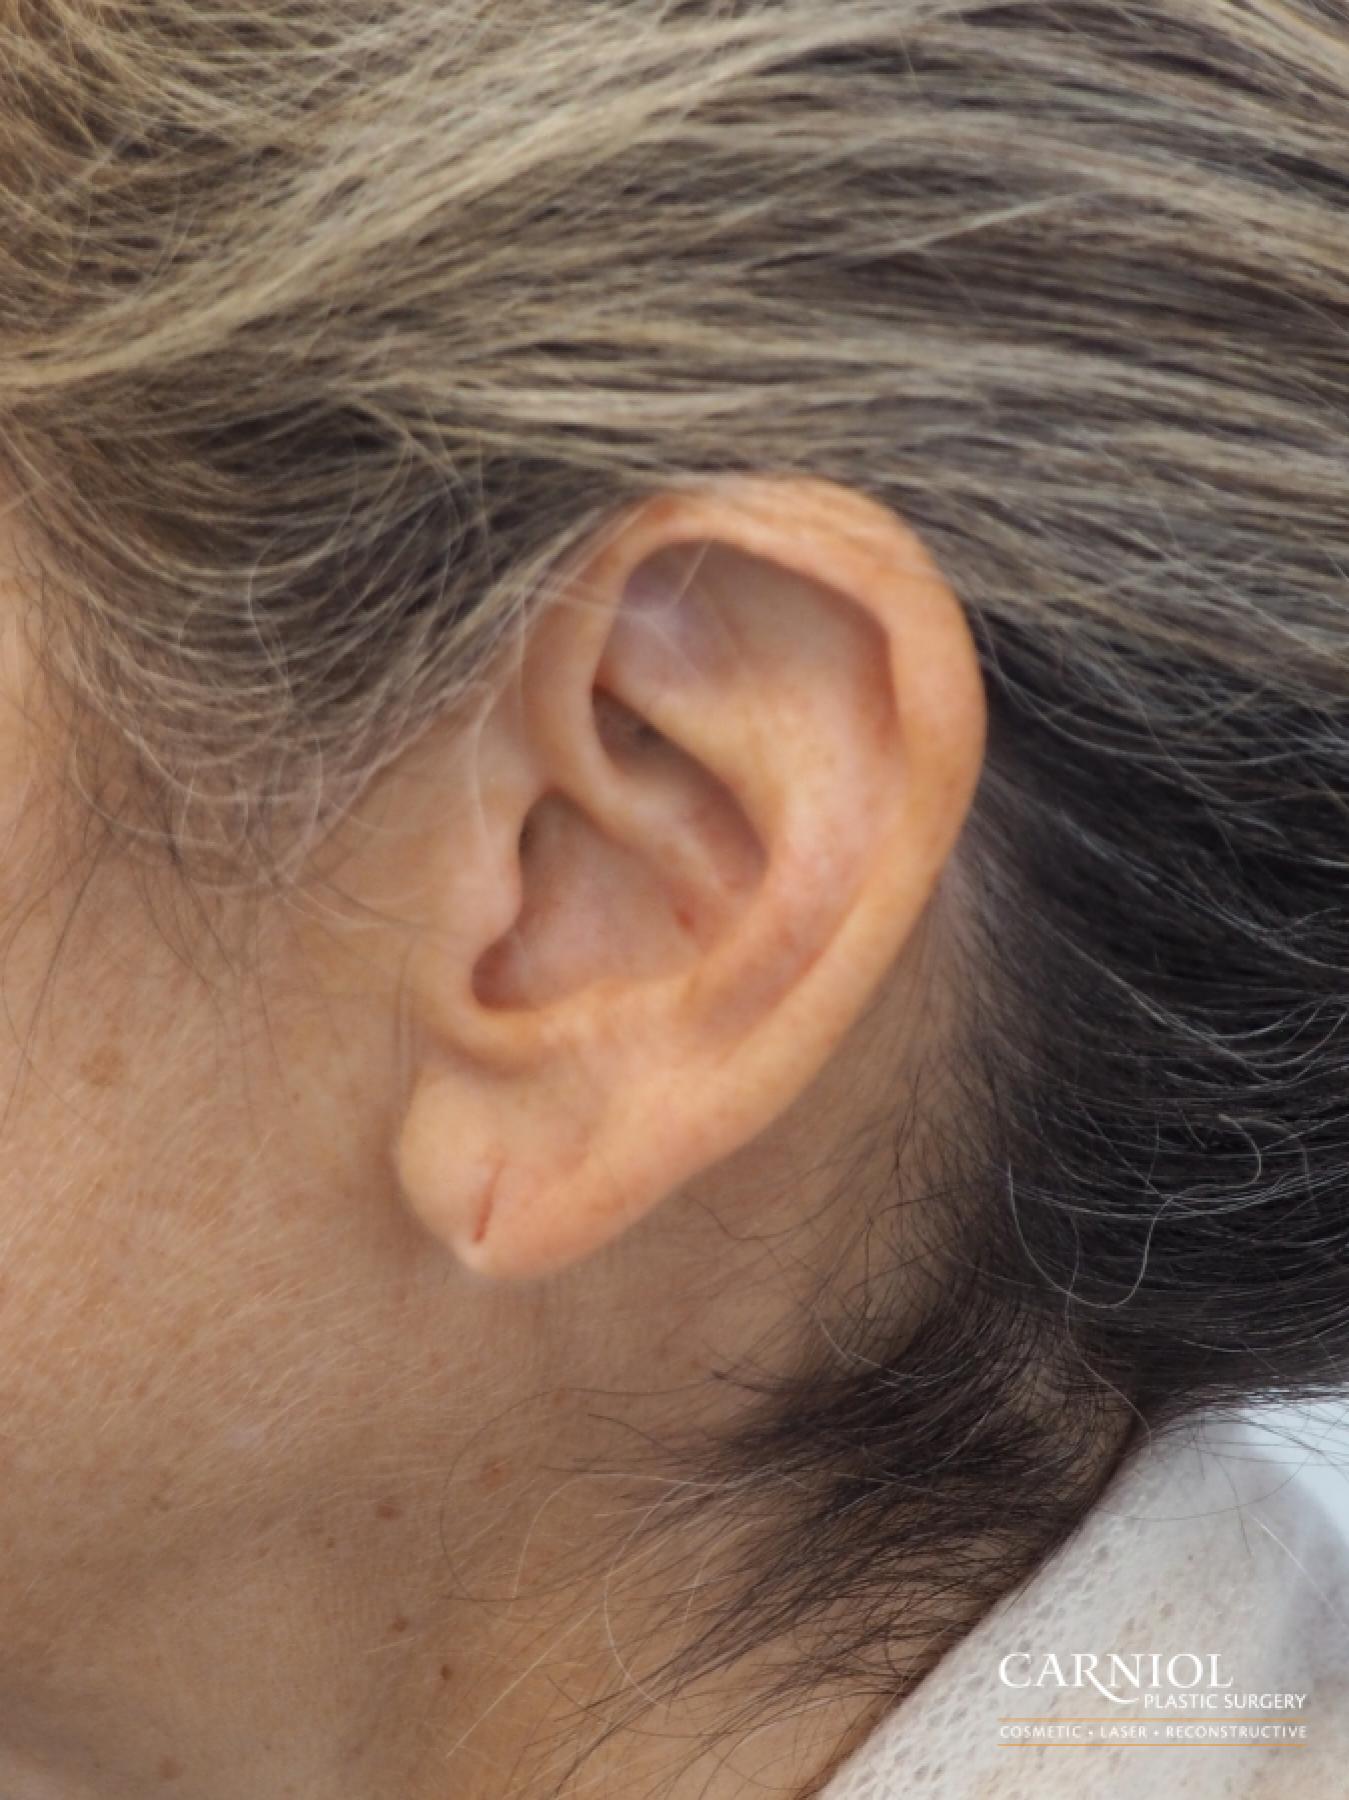 Earlobe Surgery: Patient 2 - Before and After  